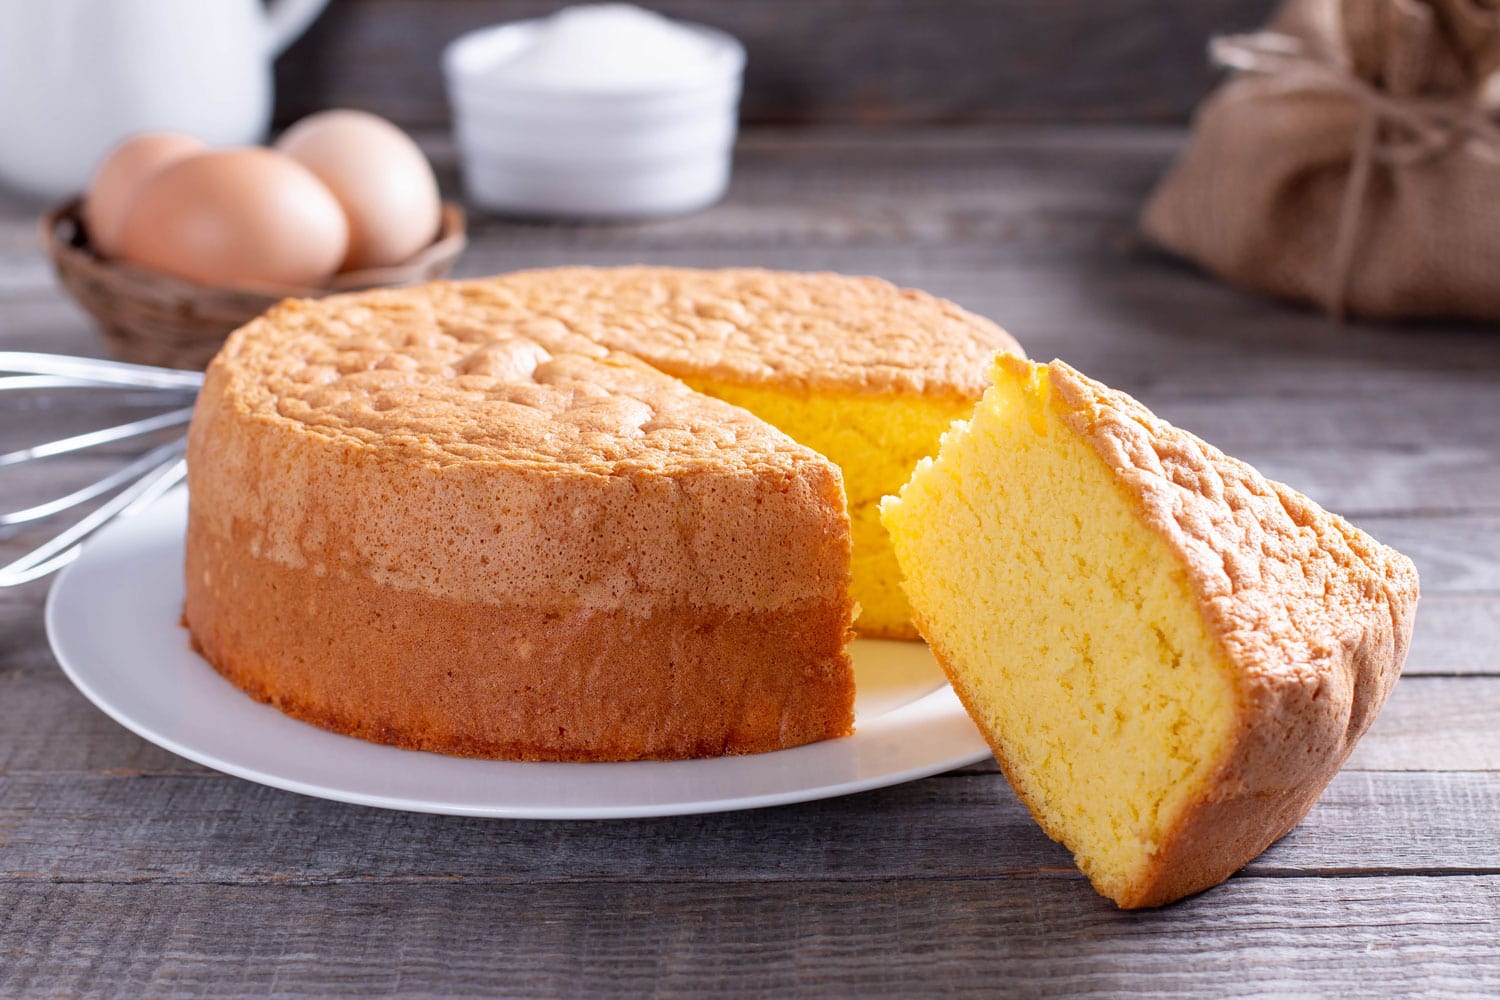 Homemade round sponge cake or chiffon cake on white plate so soft and delicious with ingredients eggs, flour, milk on wood table. Homemade bakery concept for background and wallpaper.